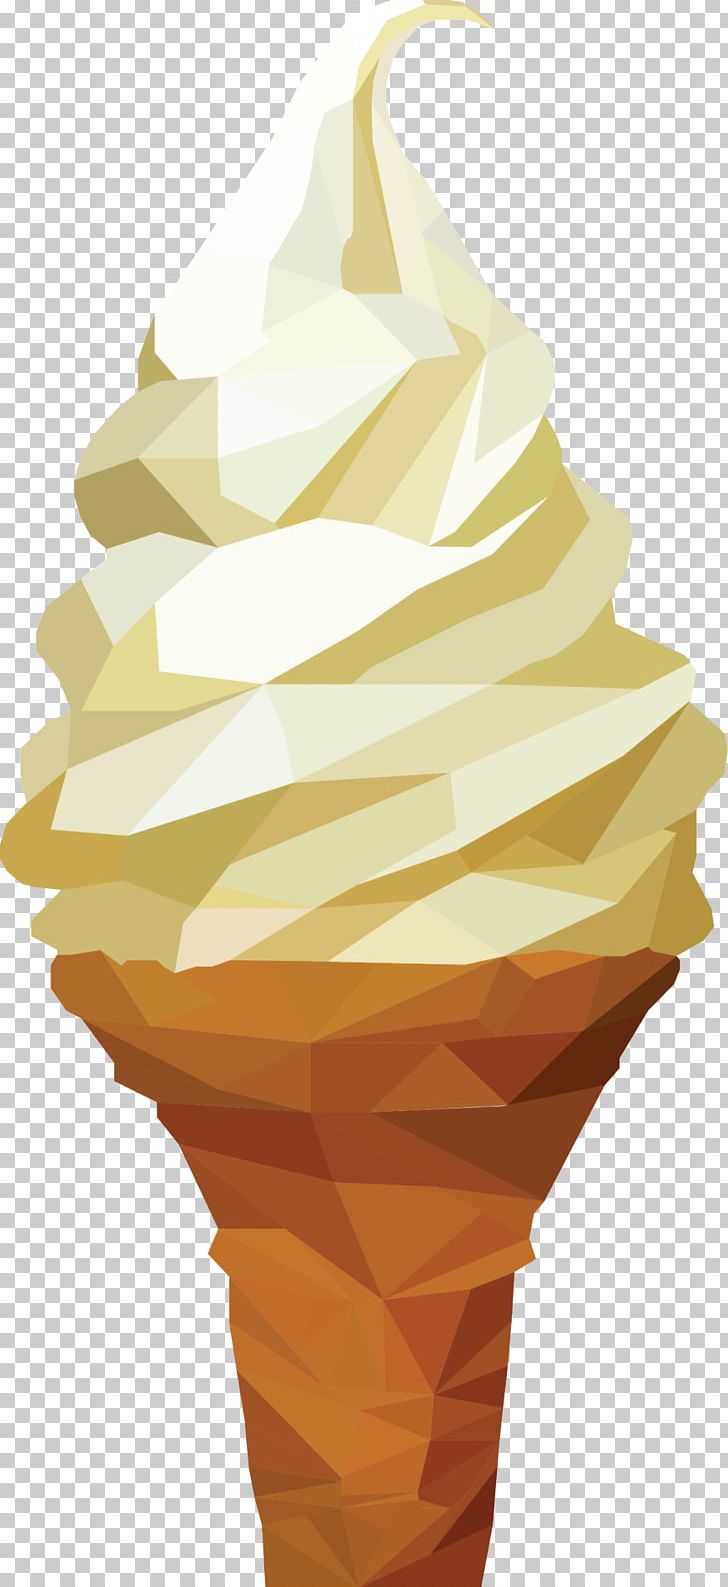 Ice Cream Cone Graphic Design PNG, Clipart, Cream, Creative, Creative Design, Dairy Product, Designer Free PNG Download